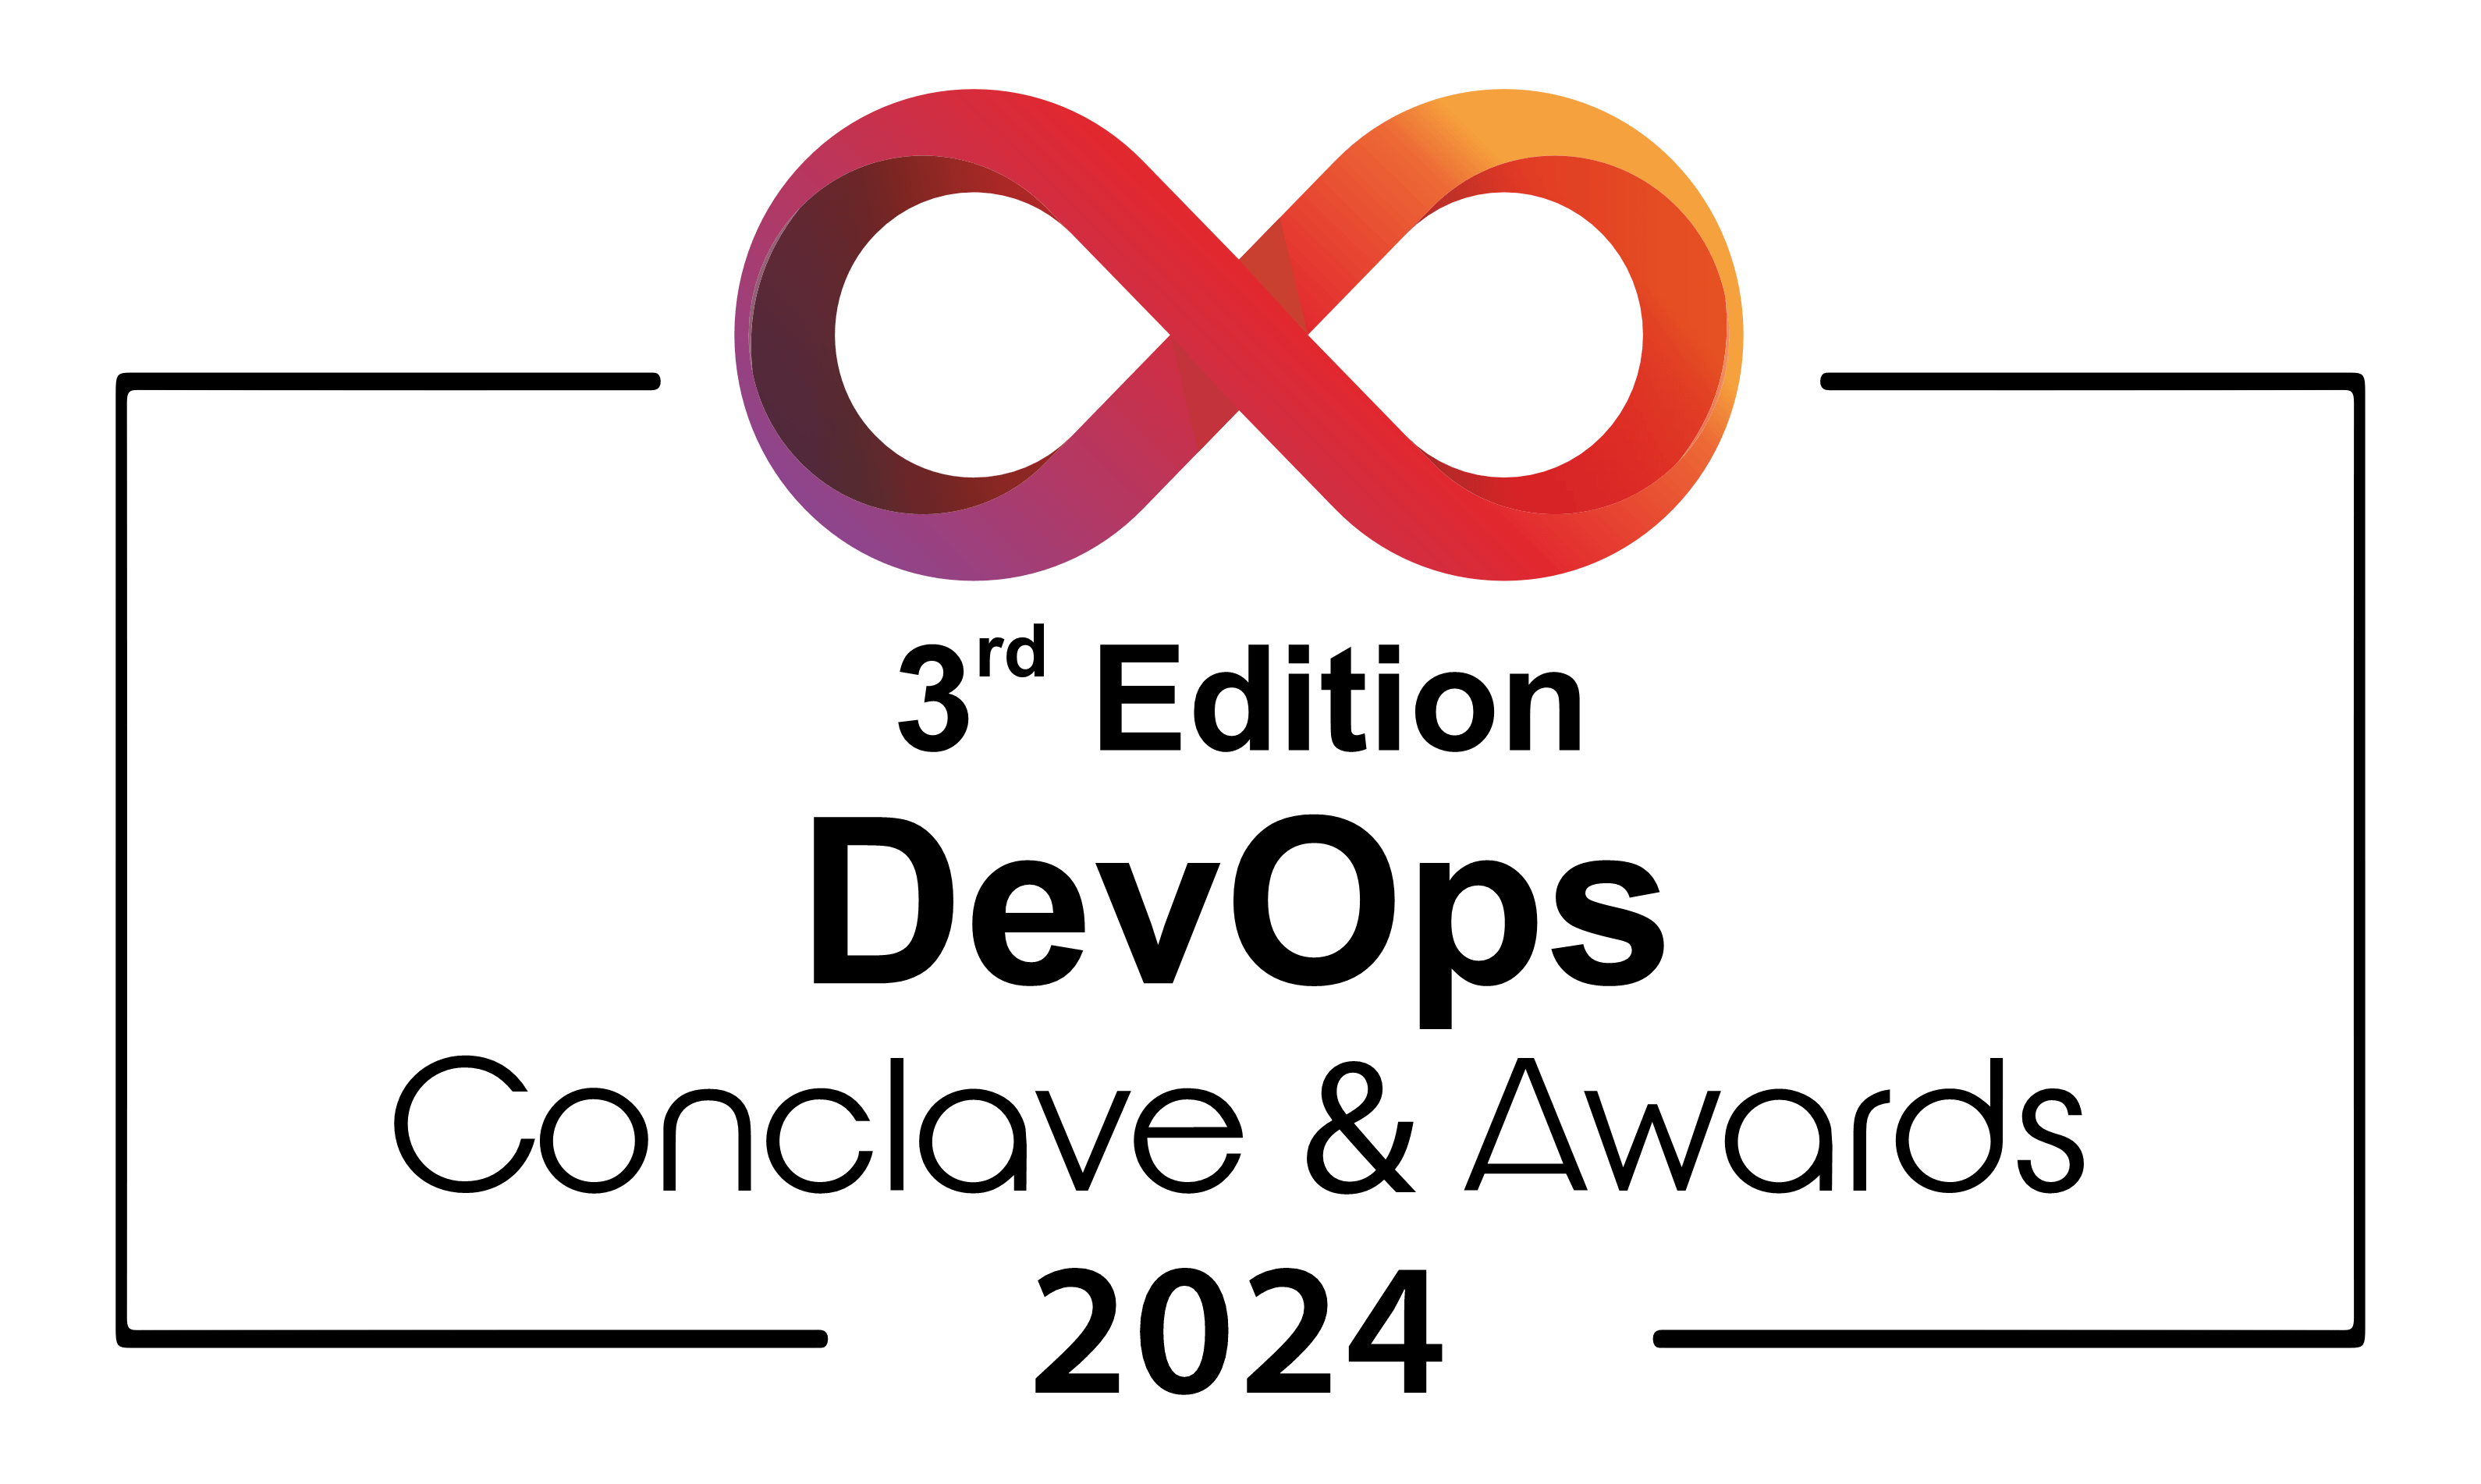 3rd Edition Devops Conclave and Awards 2024